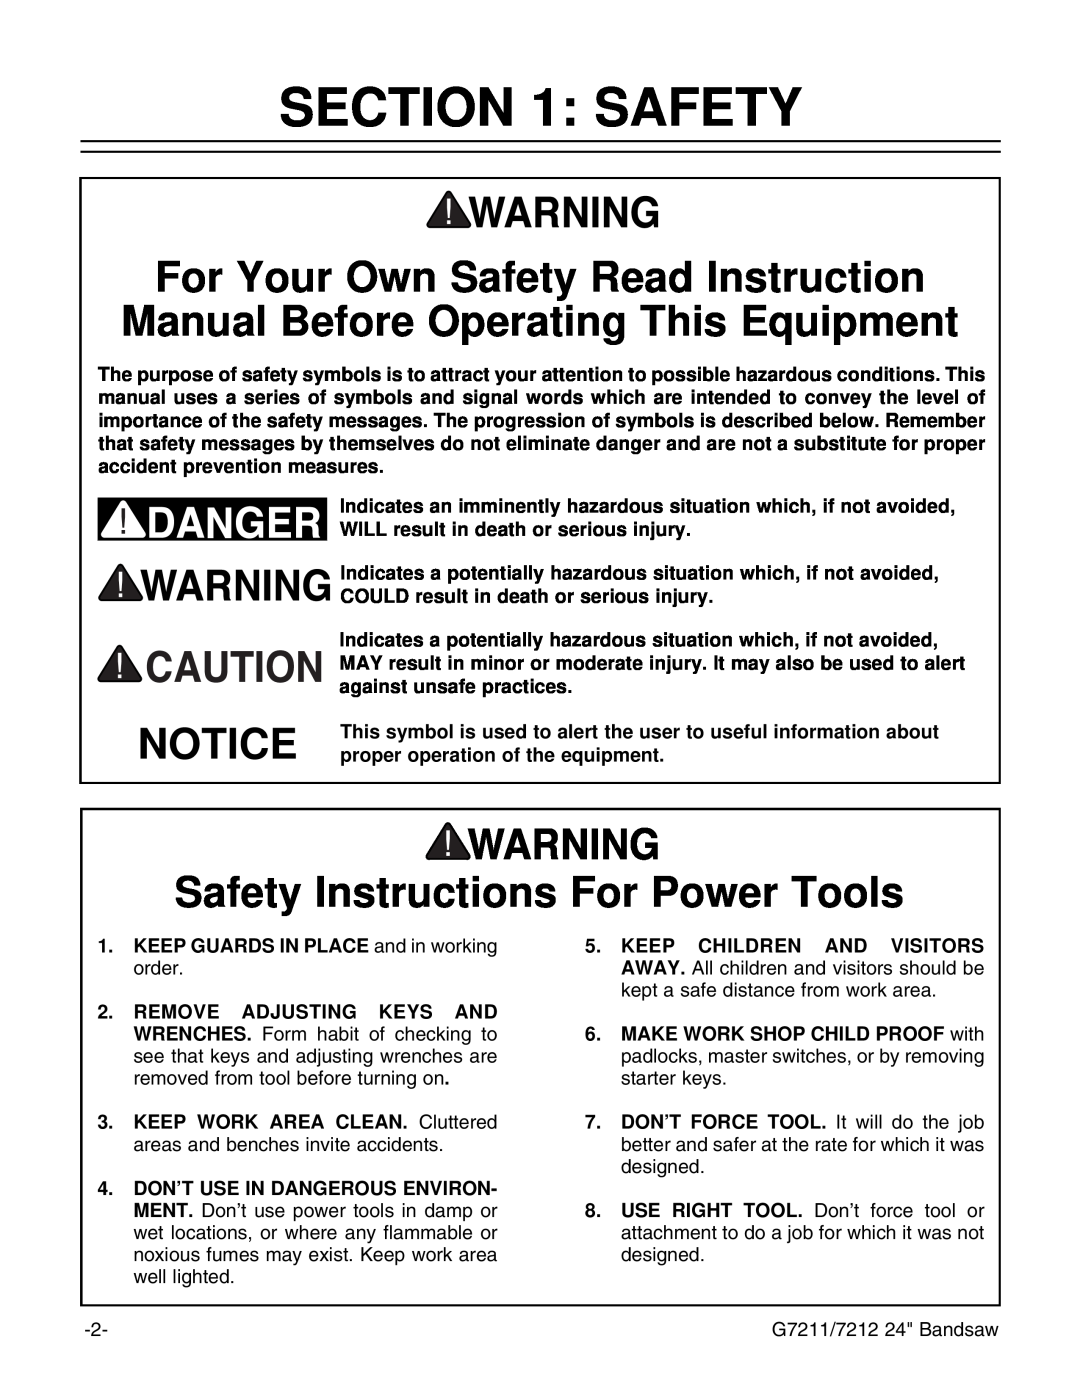 Grizzly G7212, G7211 instruction manual Safety Instructions For Power Tools 